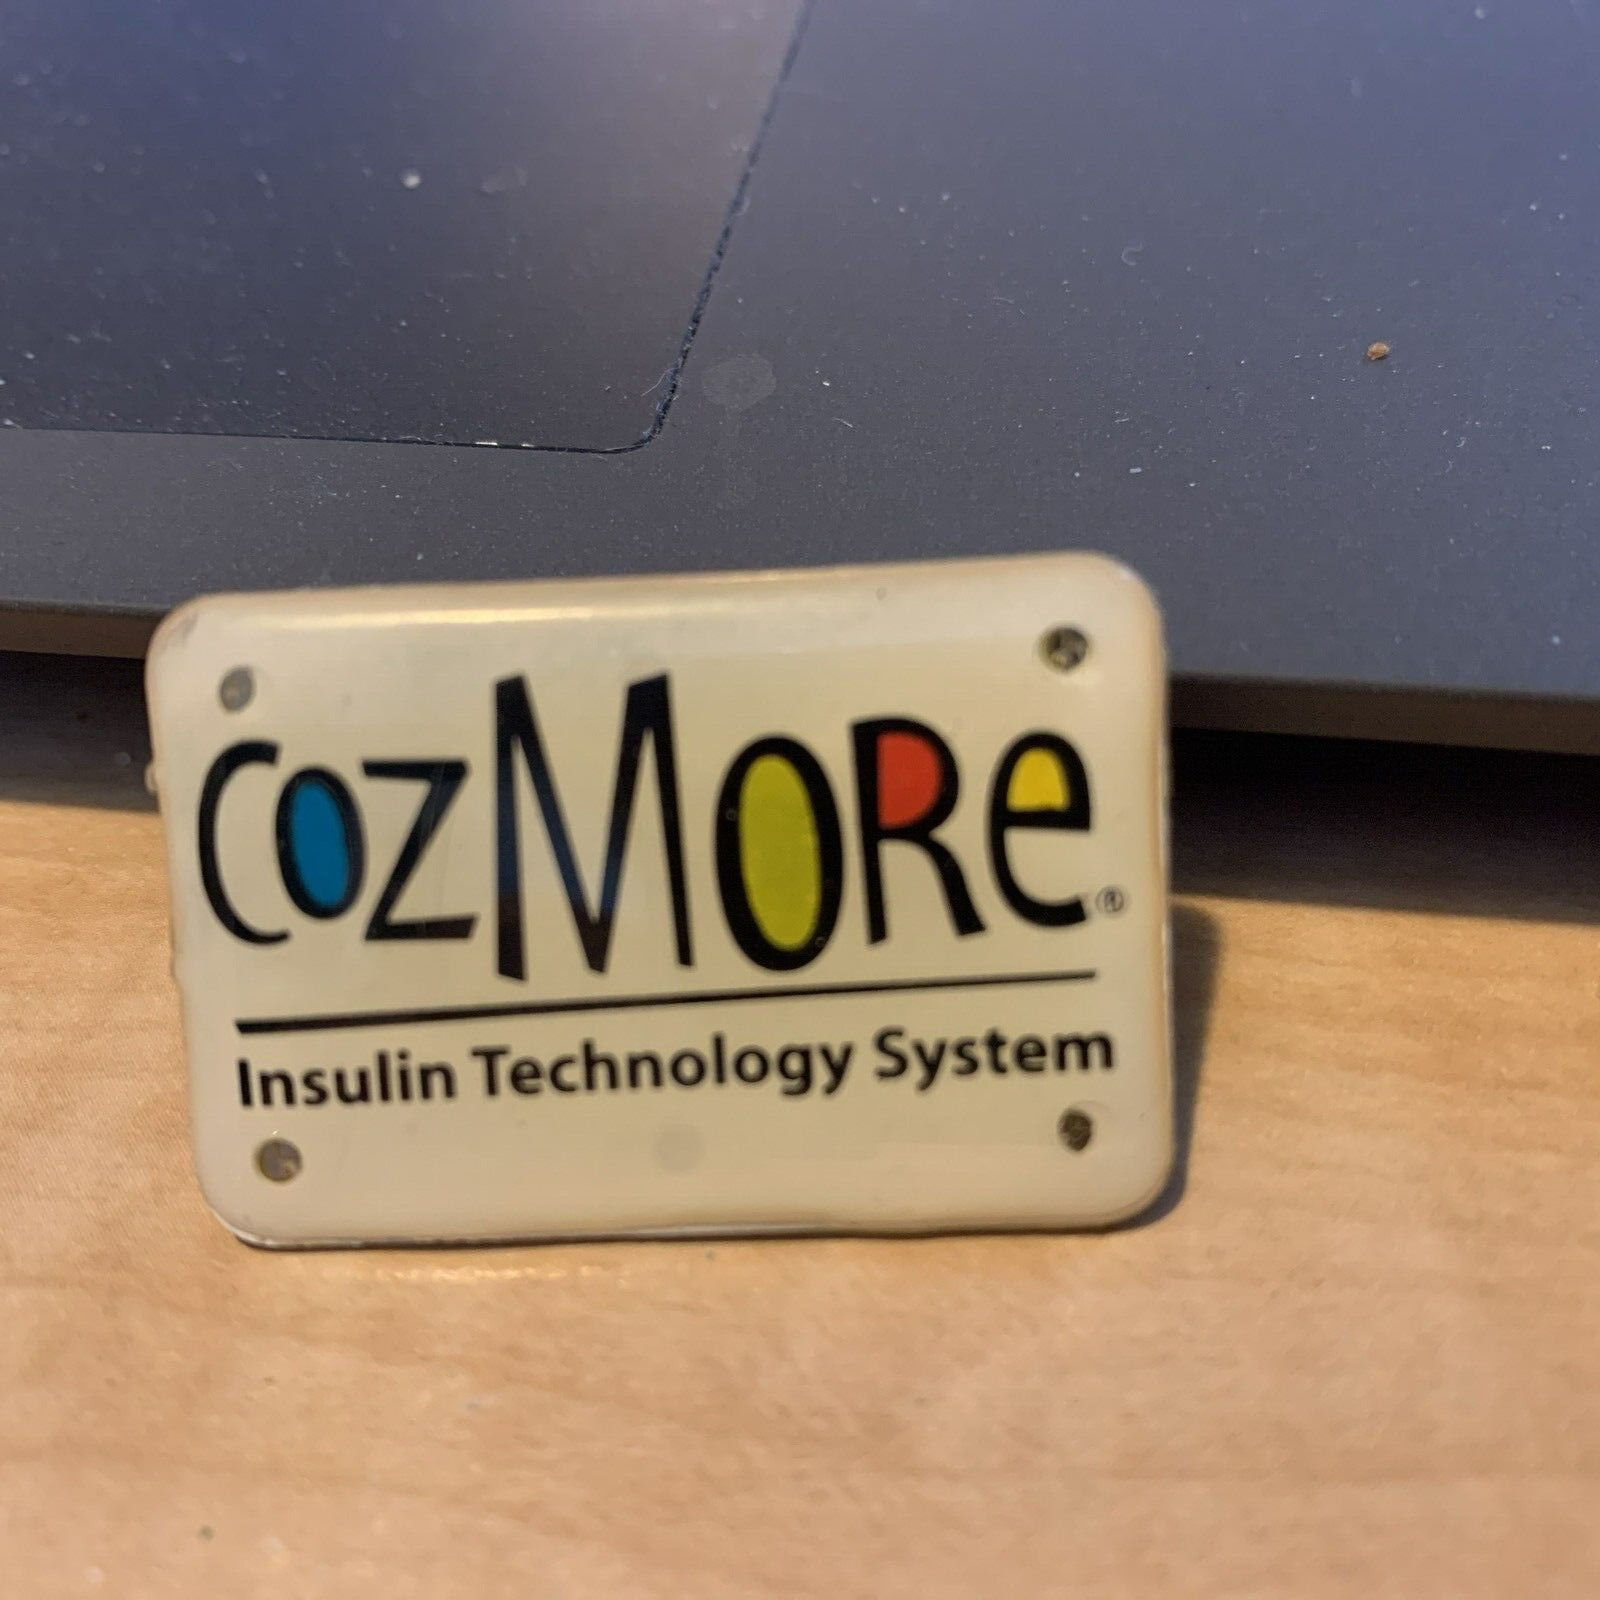 Smiths Medical CozMore Insulin Delivery  Technology System Button  Promotional